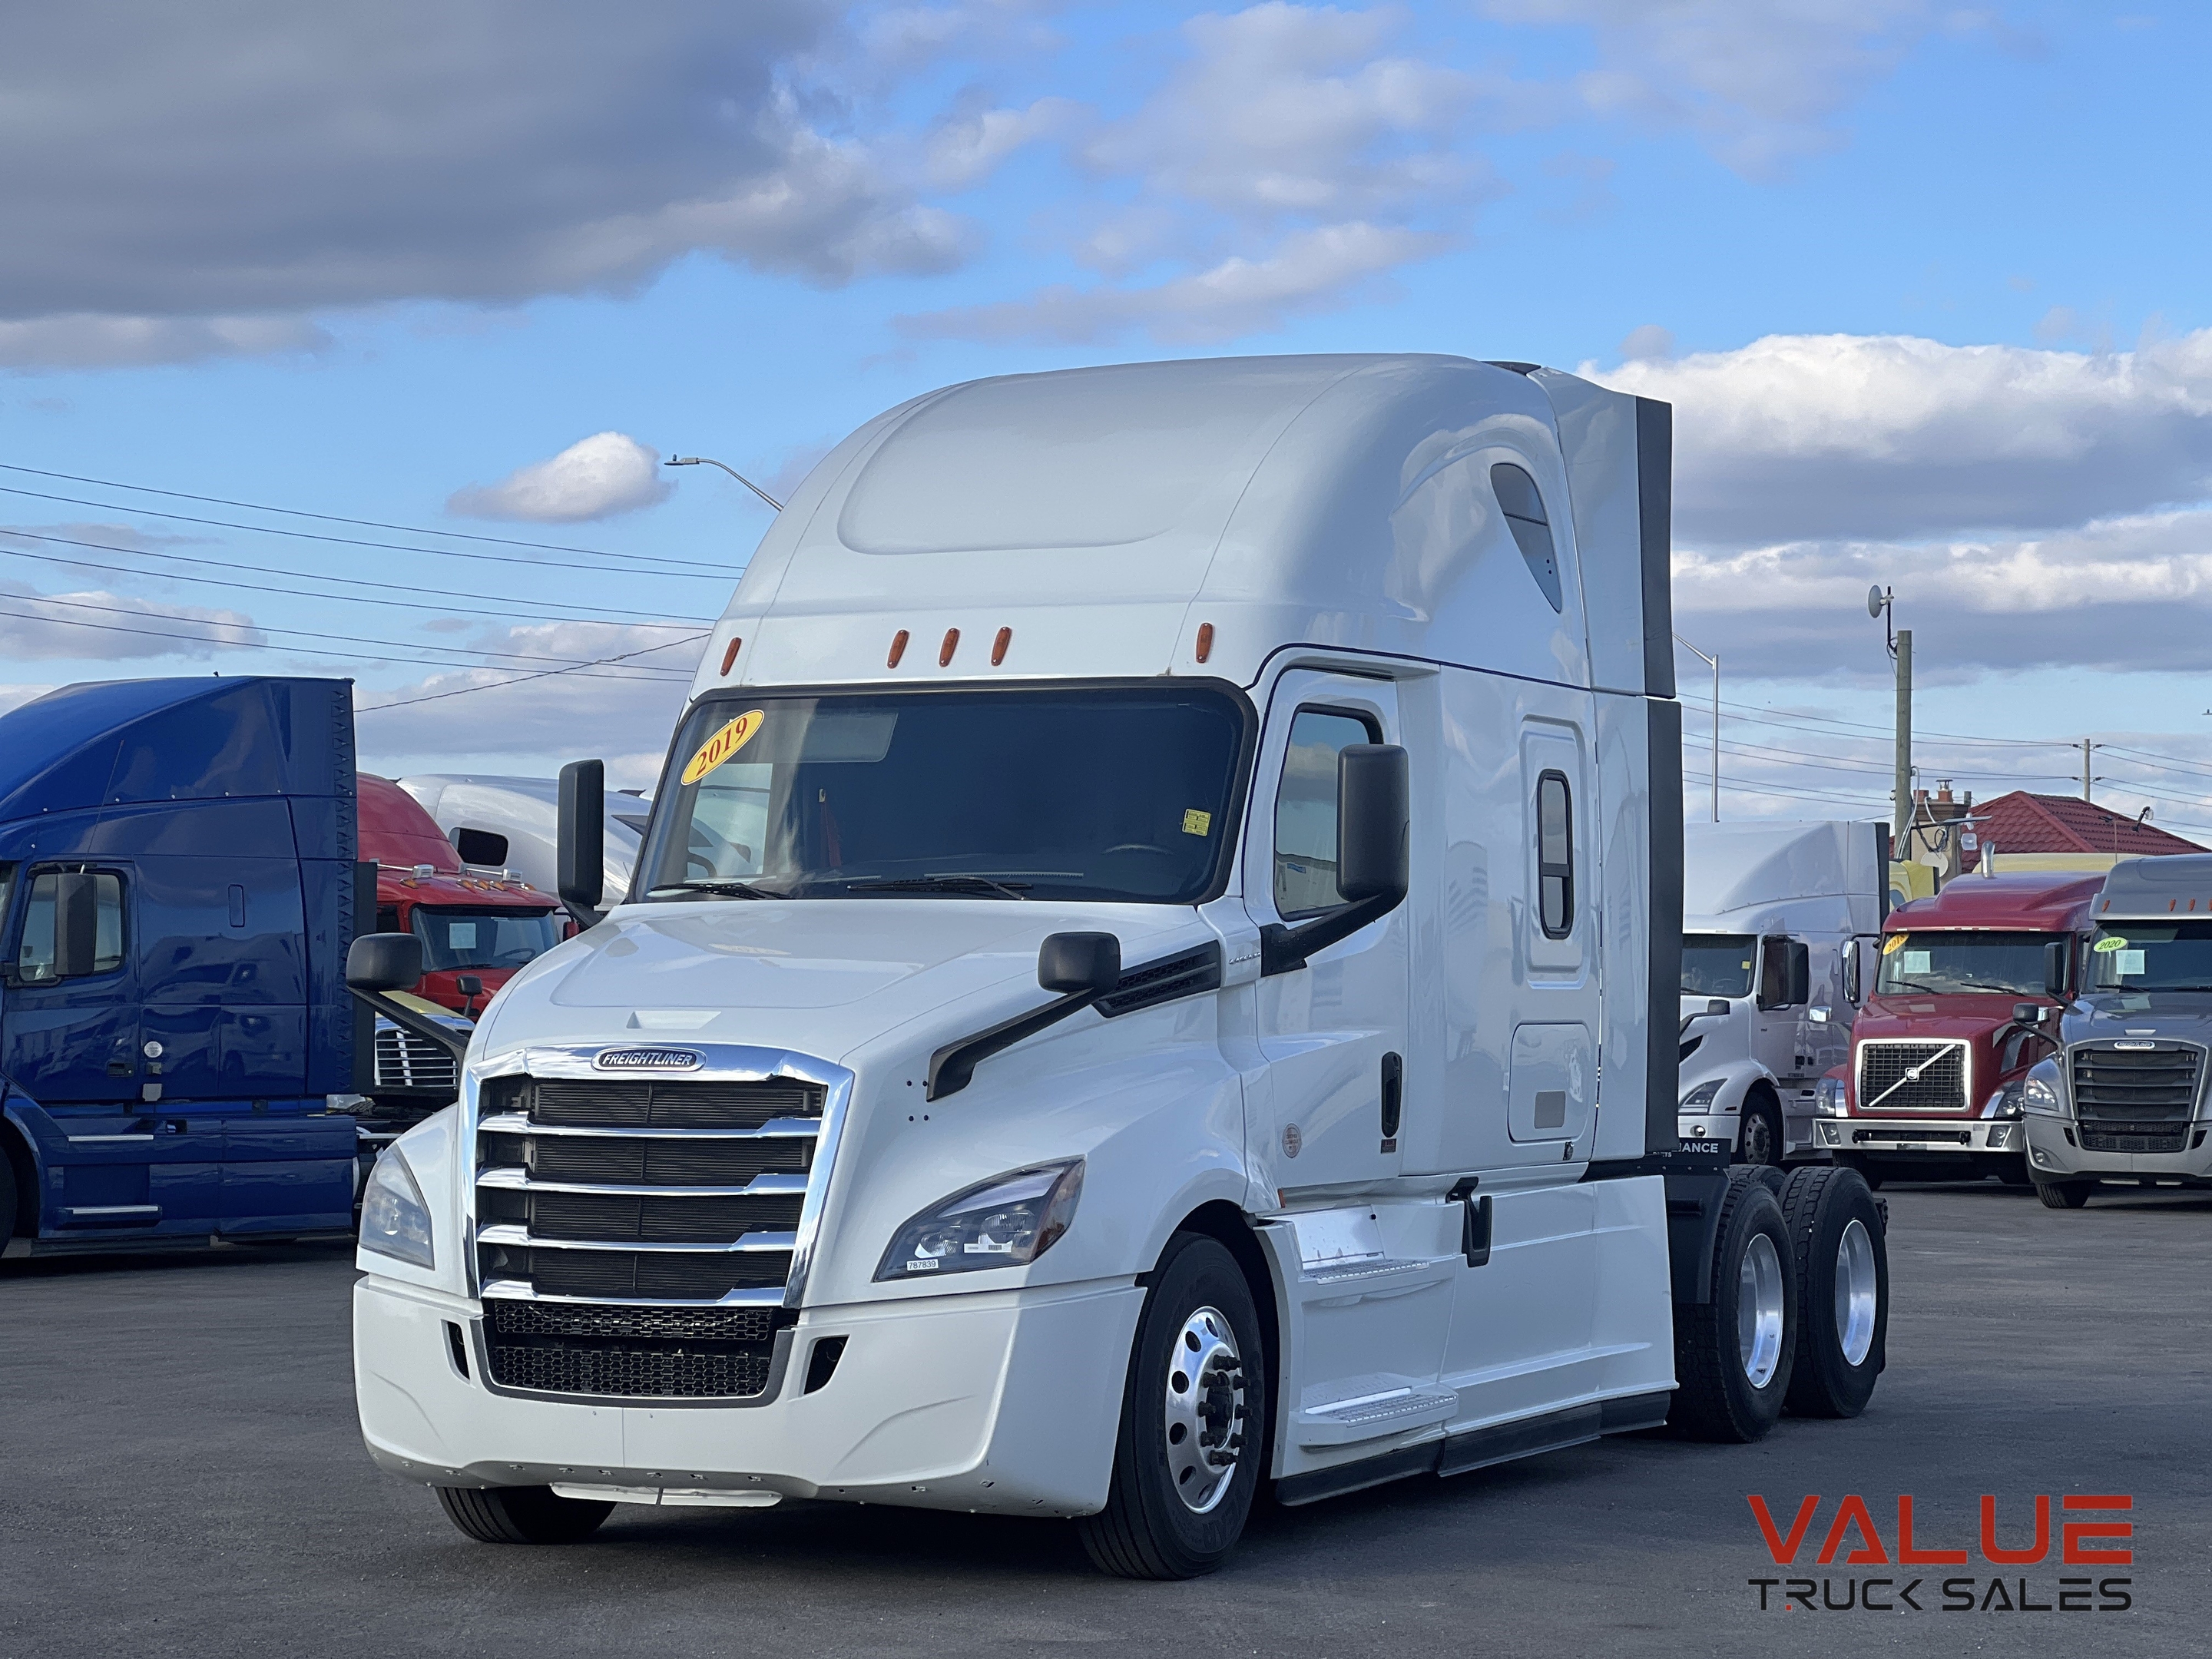 2019 Freightliner Cascadia DD15   455 HP   DT-12   Thermoking APU